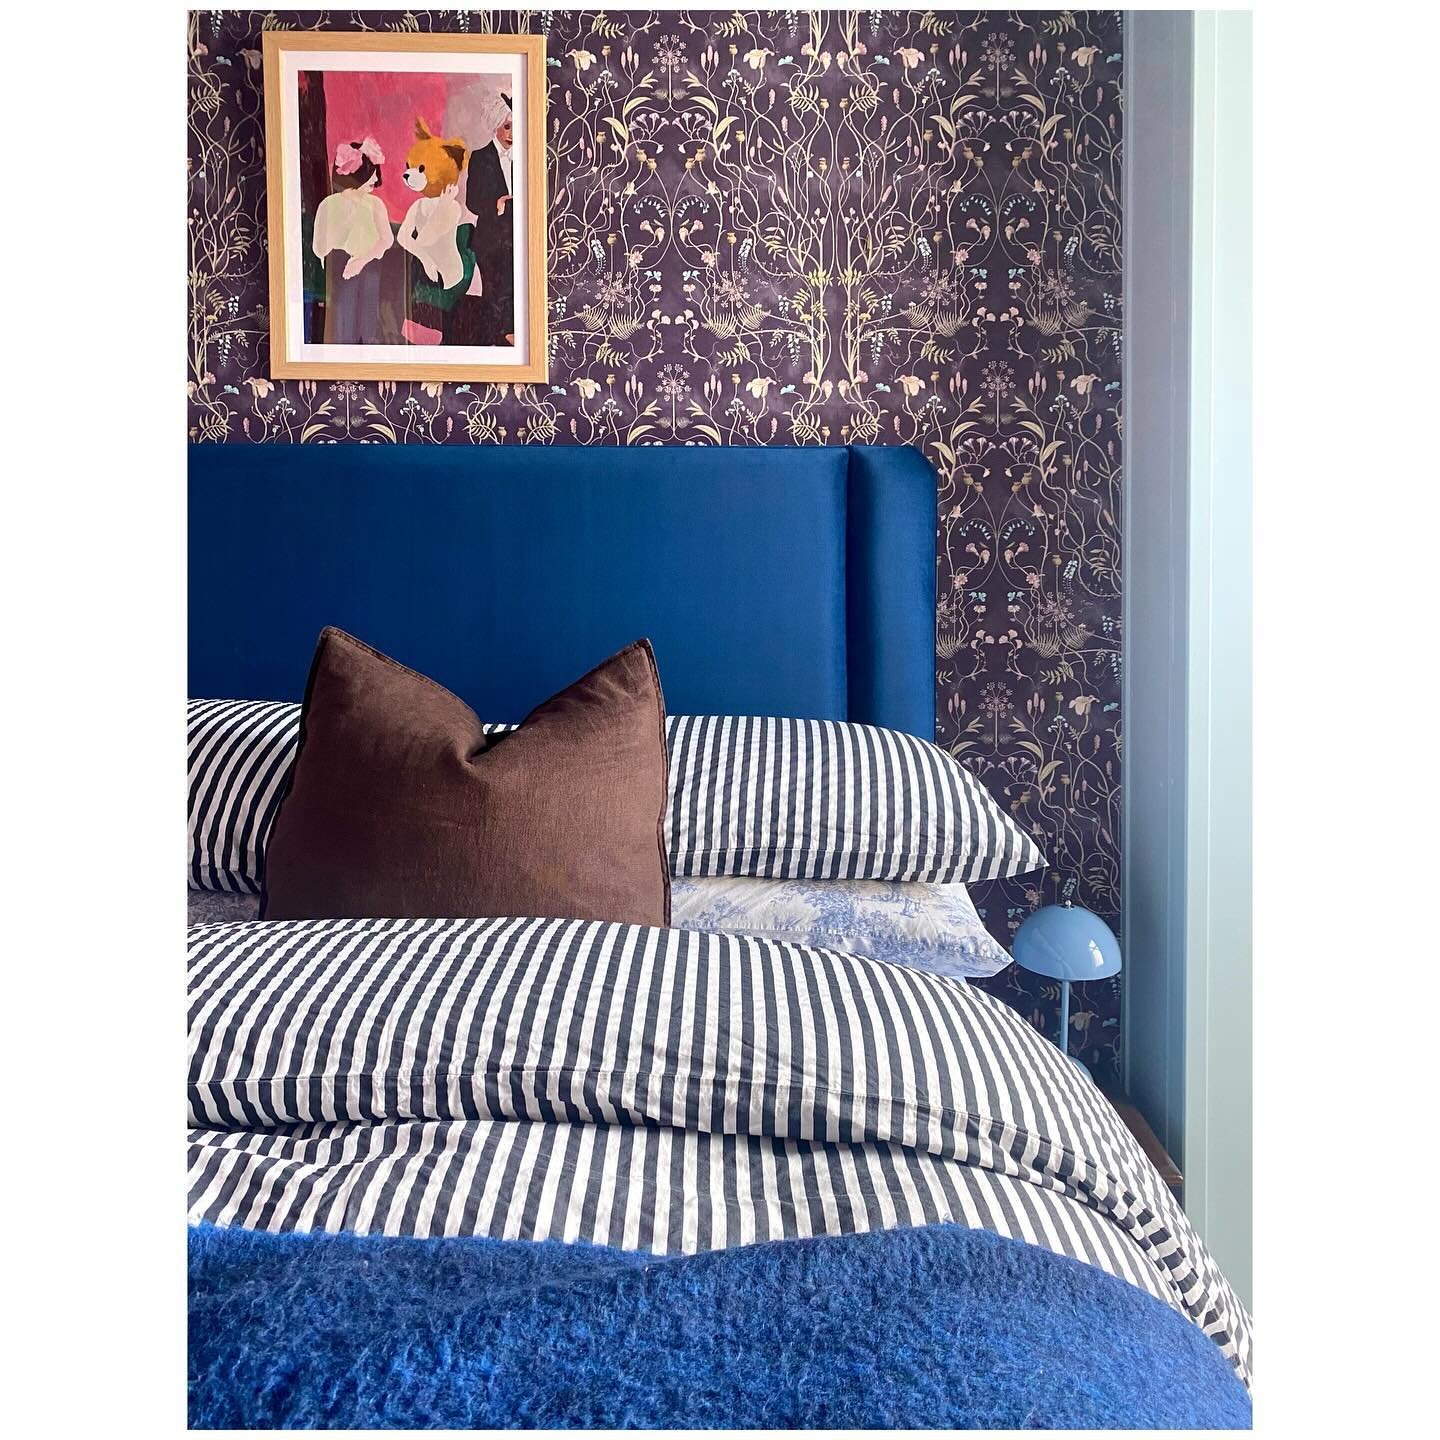 An actual bed in the guest bedroom 💙
.
.
.
#bedroomdecor #guestbedroomdecor #wallpaperlove #bluebed #interiorstyling #interiorstylist #interiordesign #victorianterrace #victorianhouserenovation #myvictorianhouselove #periodproperty #printandpattern 